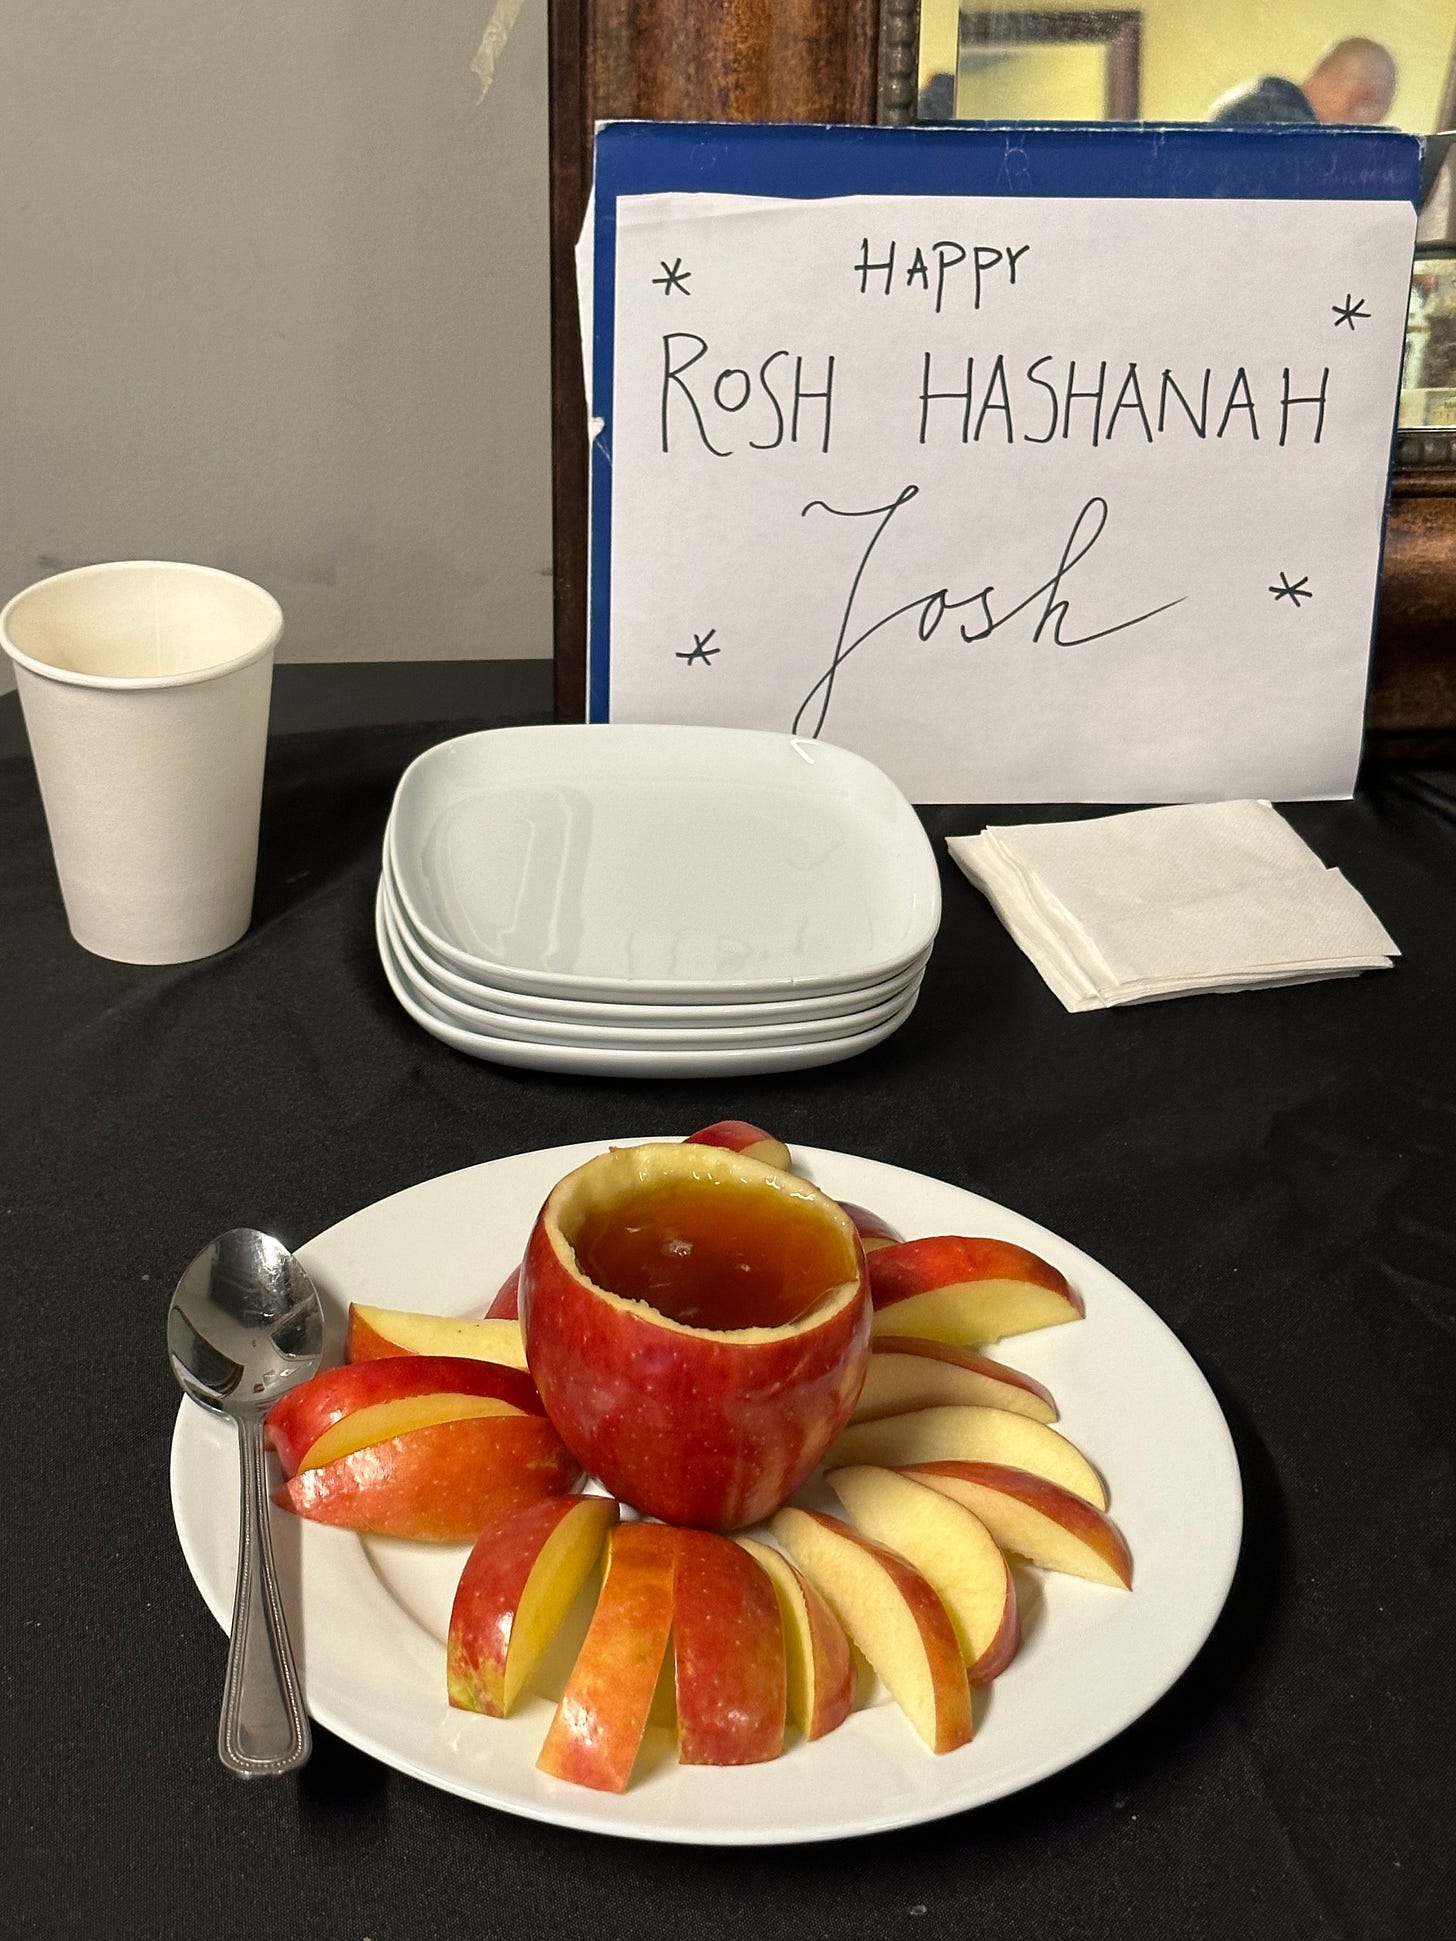 A "Happy Rosh Hashanah, Josh!" sign with some apples and honey. The honey is inside a hollowed-out apple.